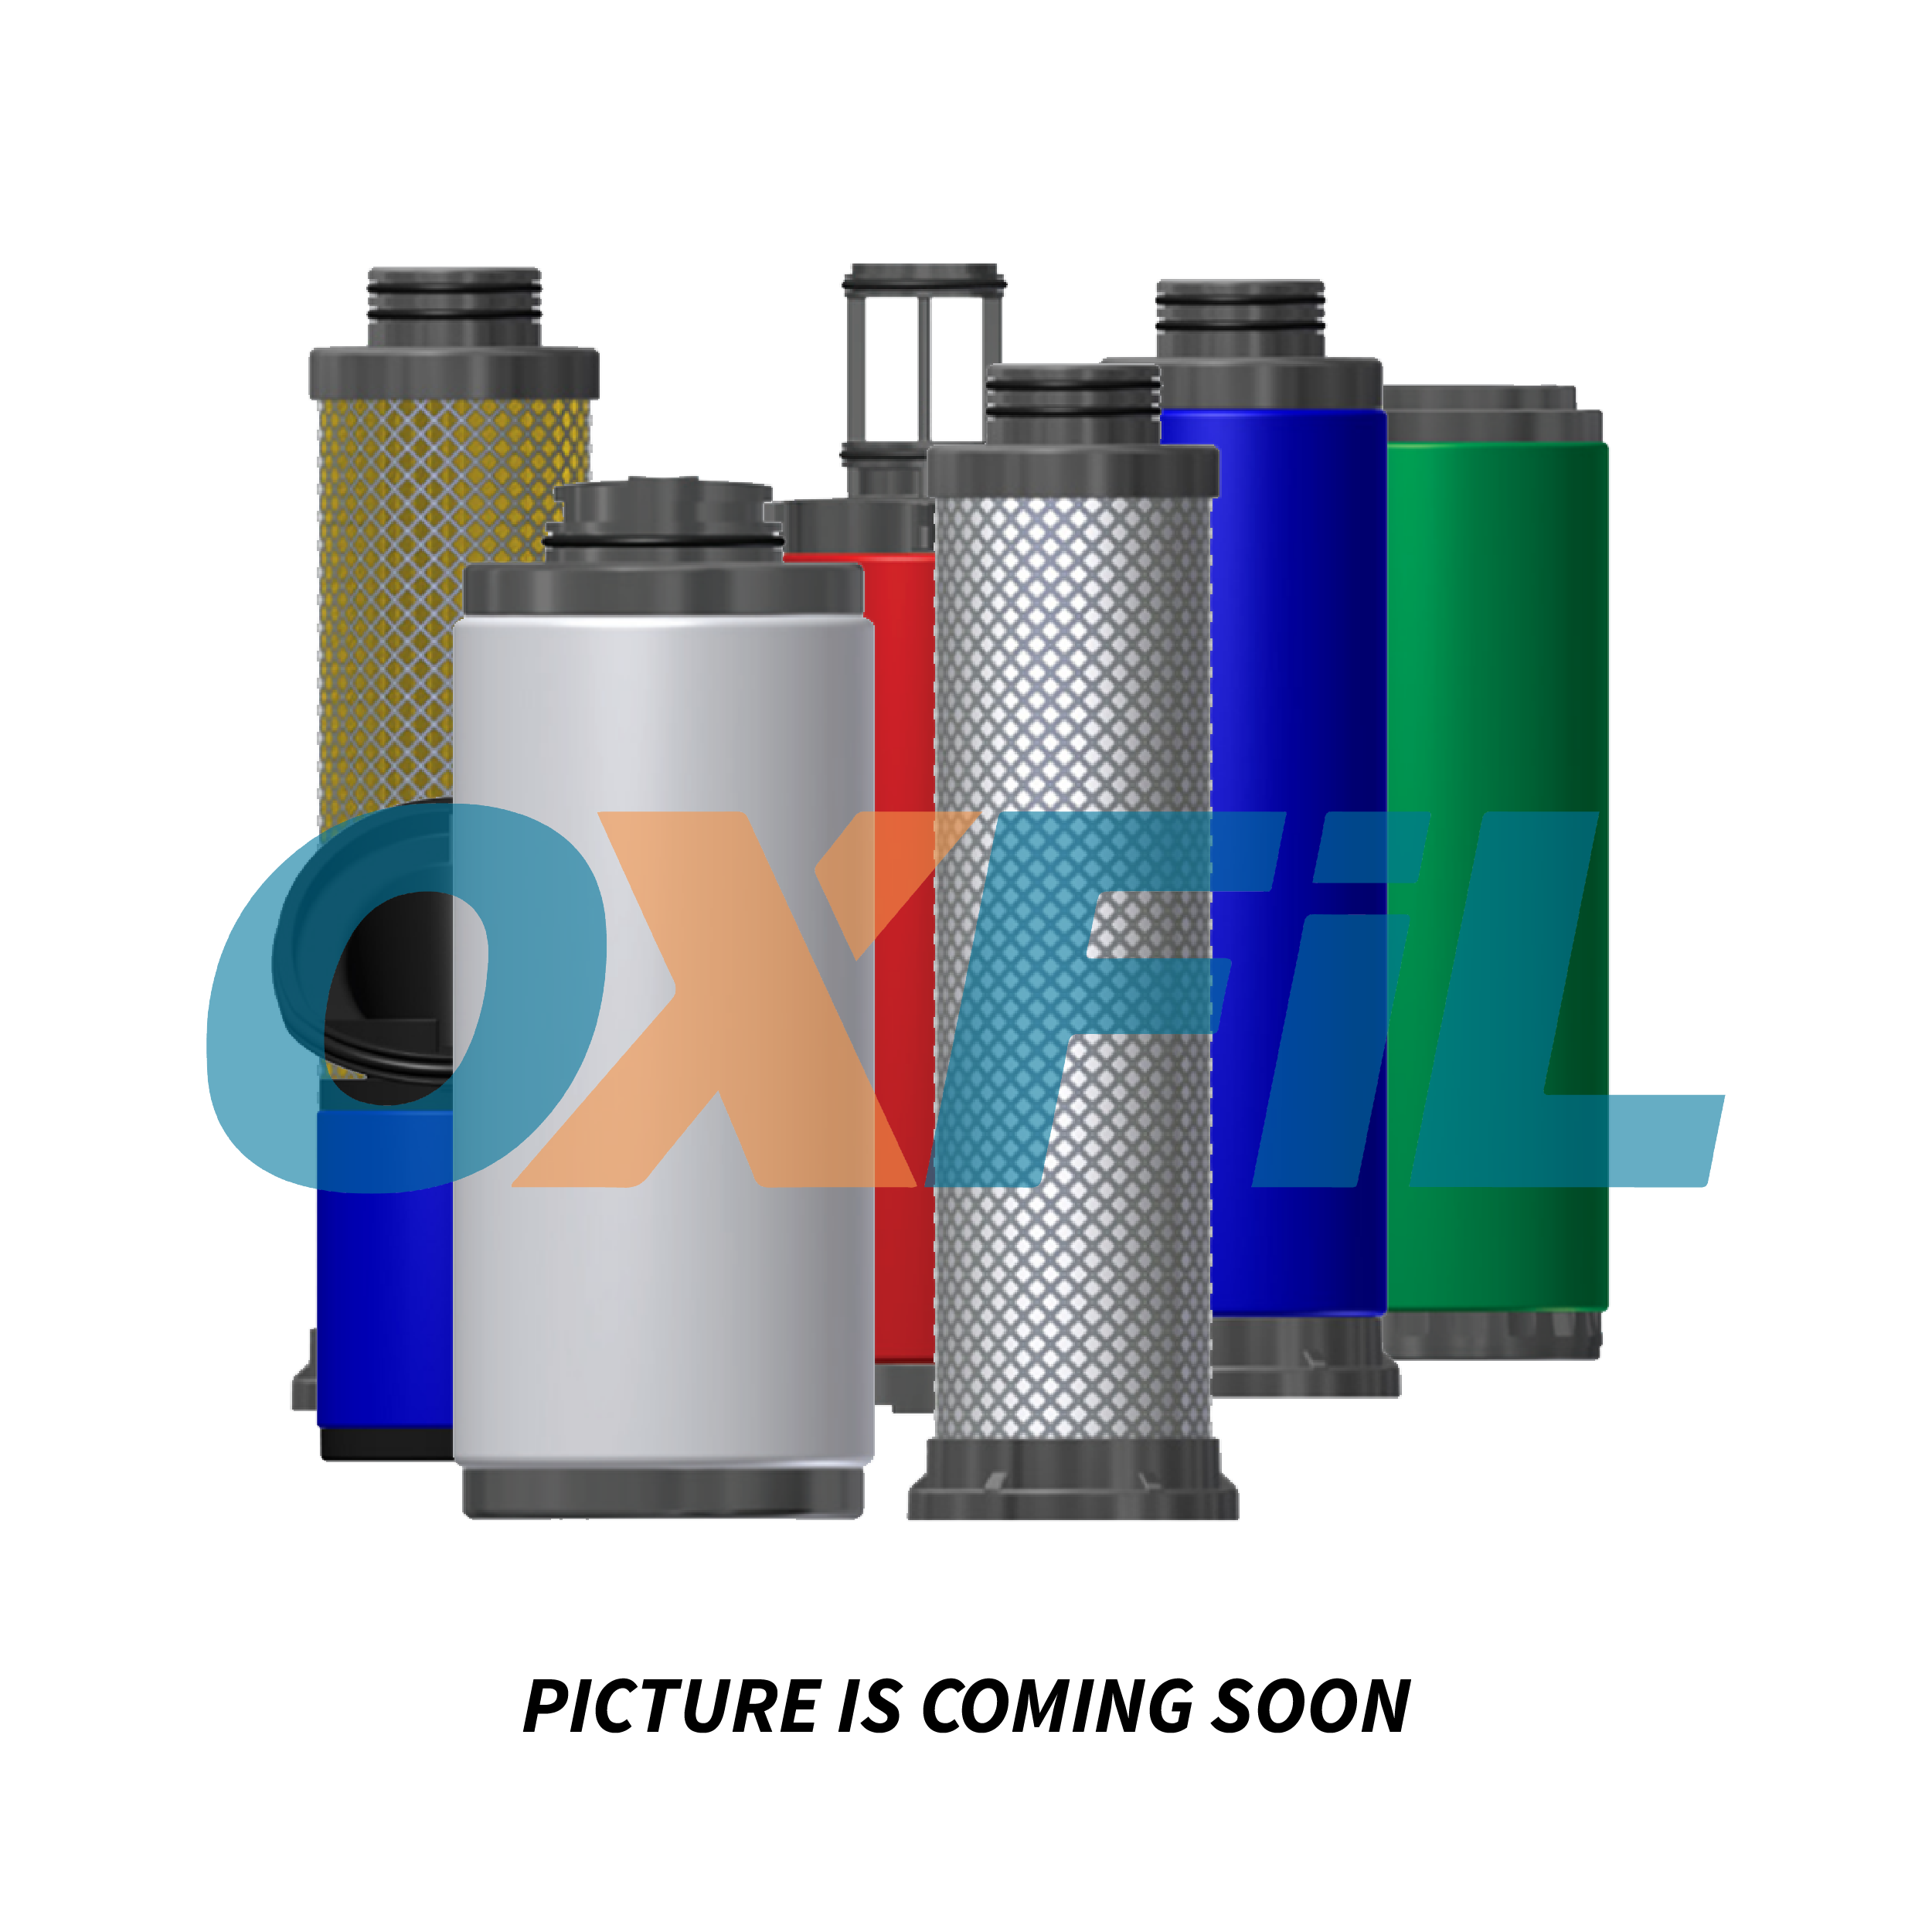 Related product IF.4716 - In-line Filter